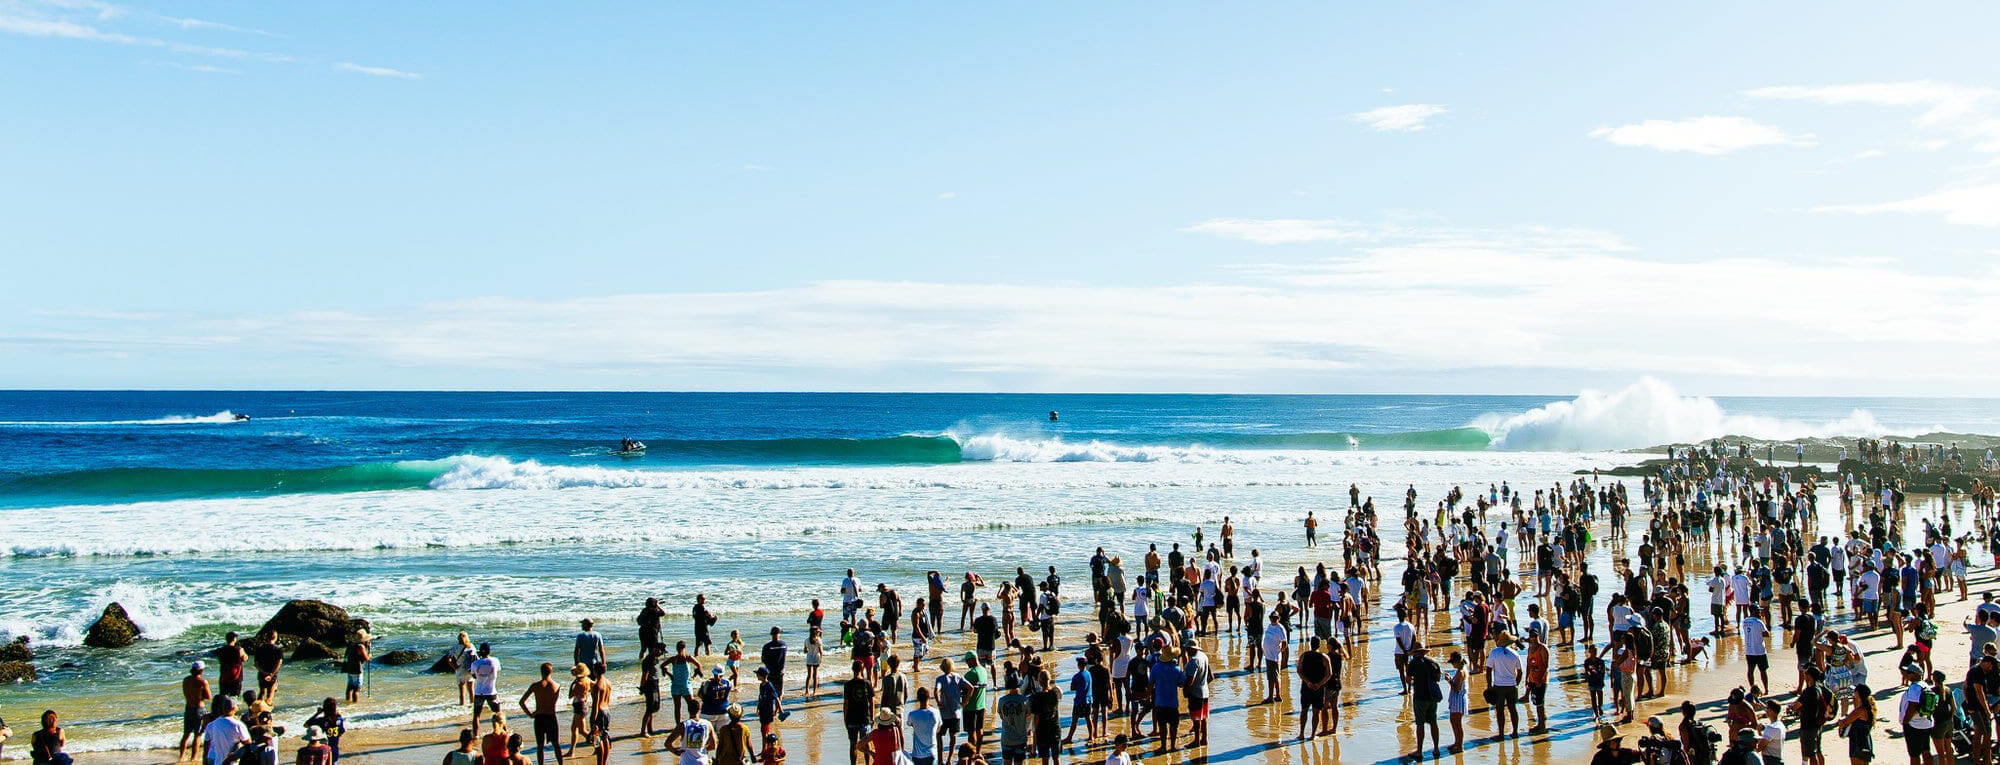 Crowd of spectators watching surfing at Snapper Rocks, QLD Australia